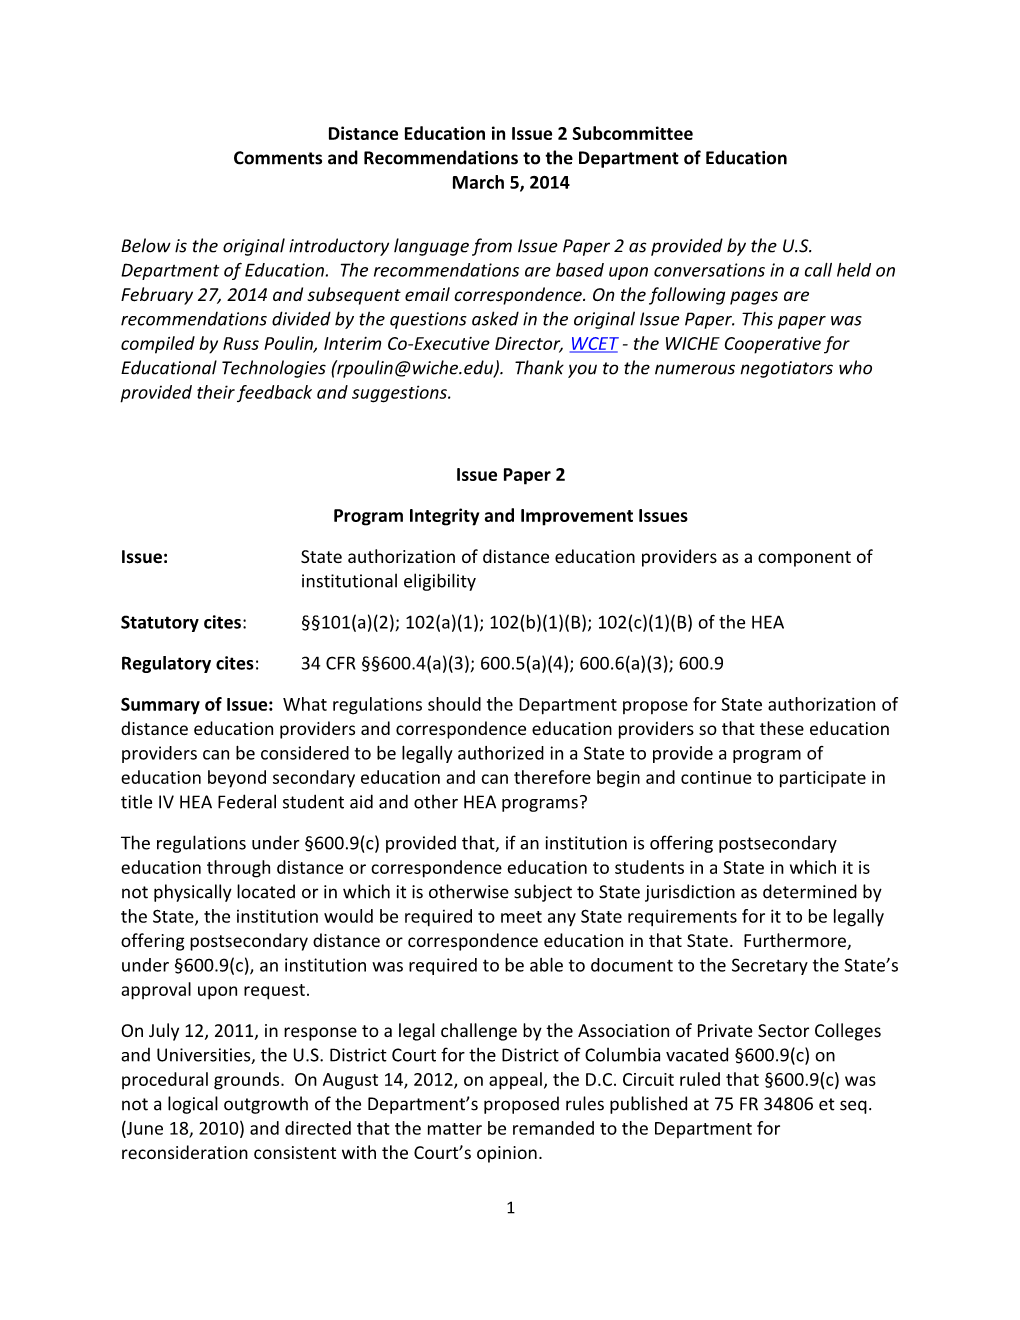 Negotiated Rulemaking for Higher Education 2012-2014: Program Integrity and Improvement